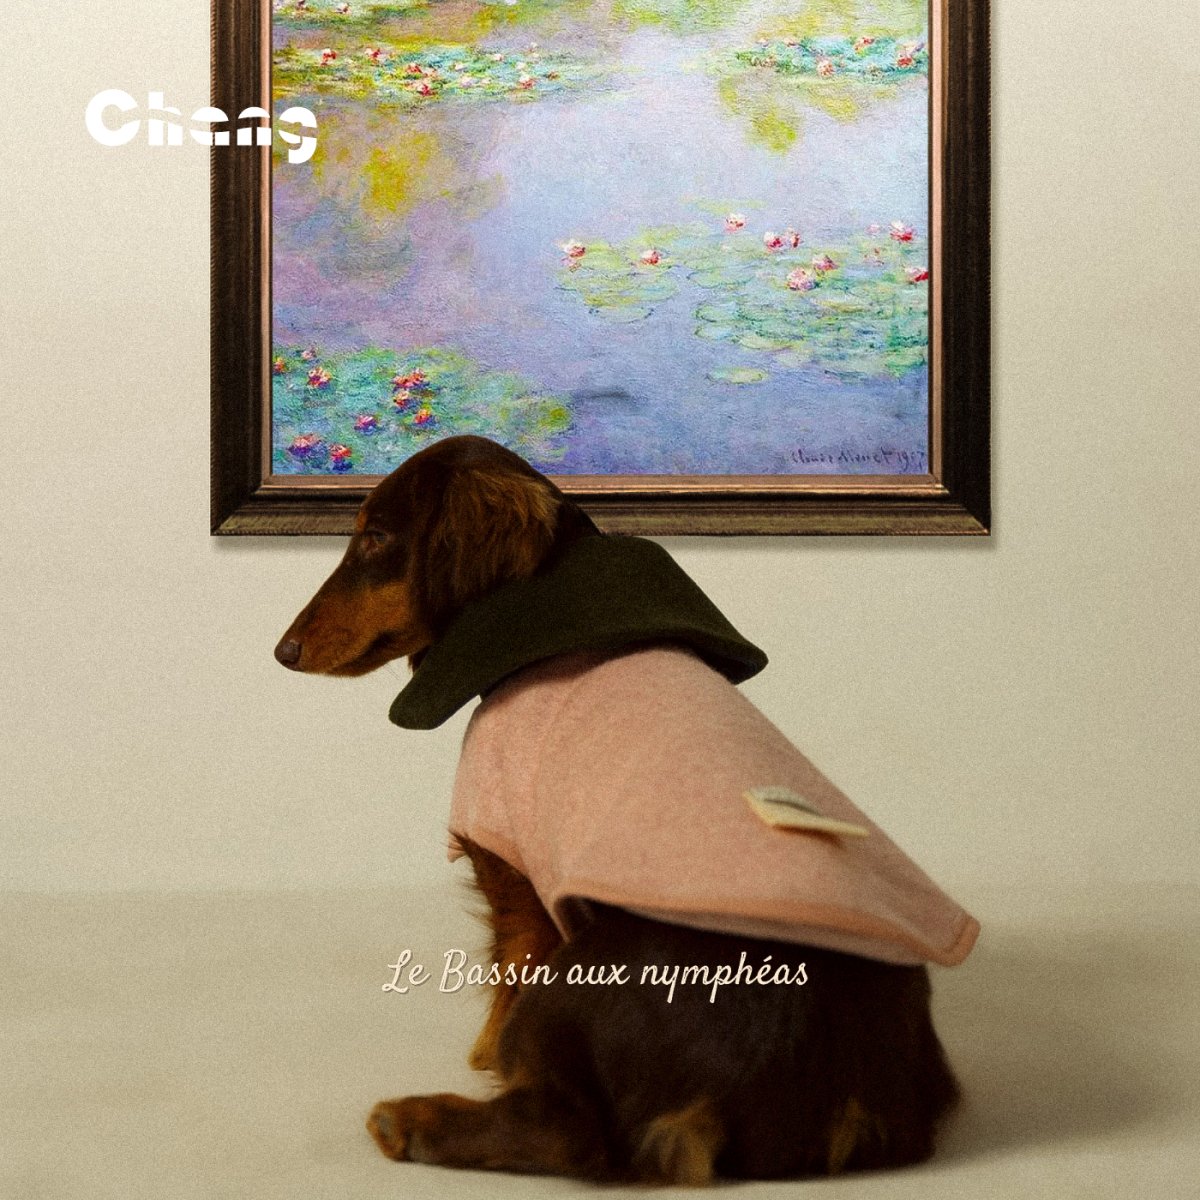 Dachshund Coat | GREENHOUSE FLORAL WOOL COAT - Le Bassin aux nymphéas - Chang